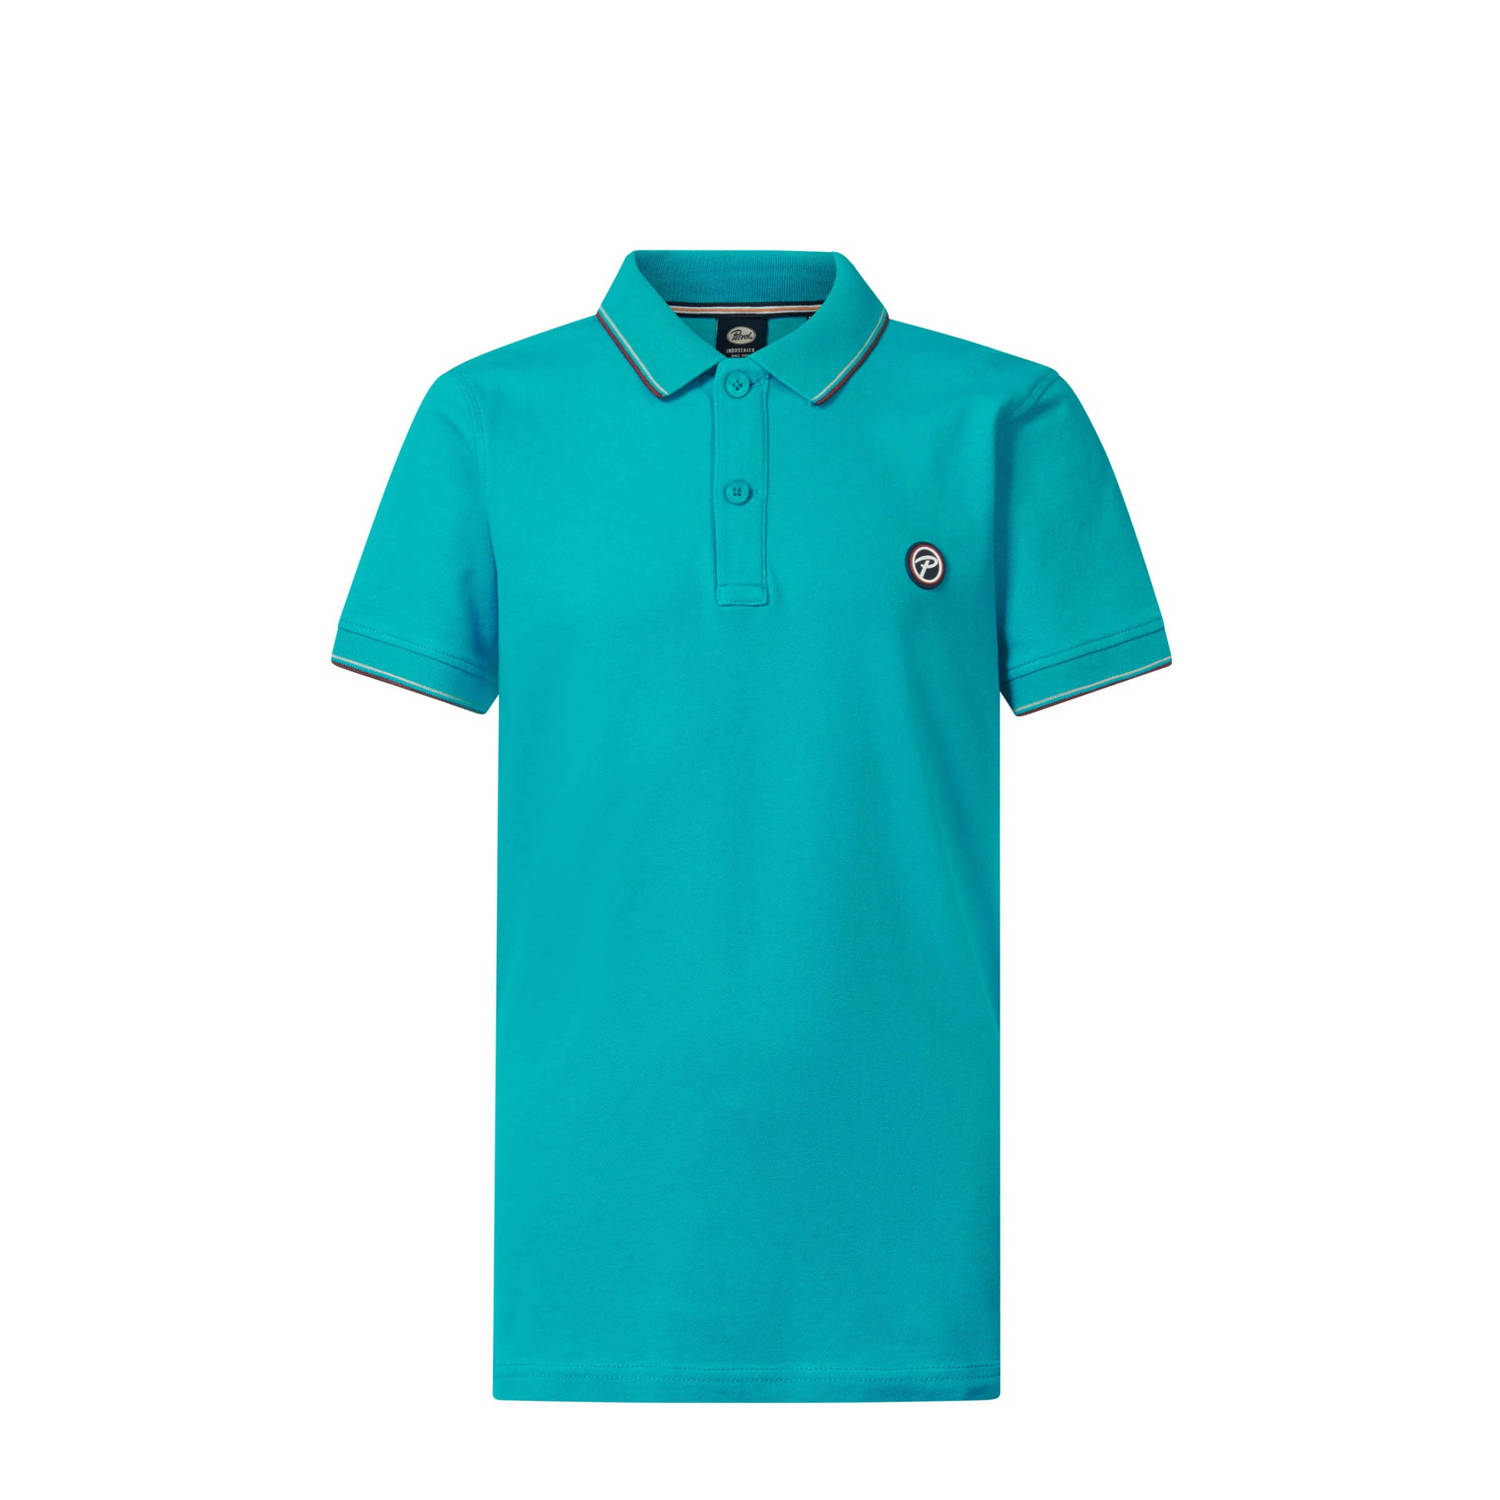 Petrol Industries polo turquoise